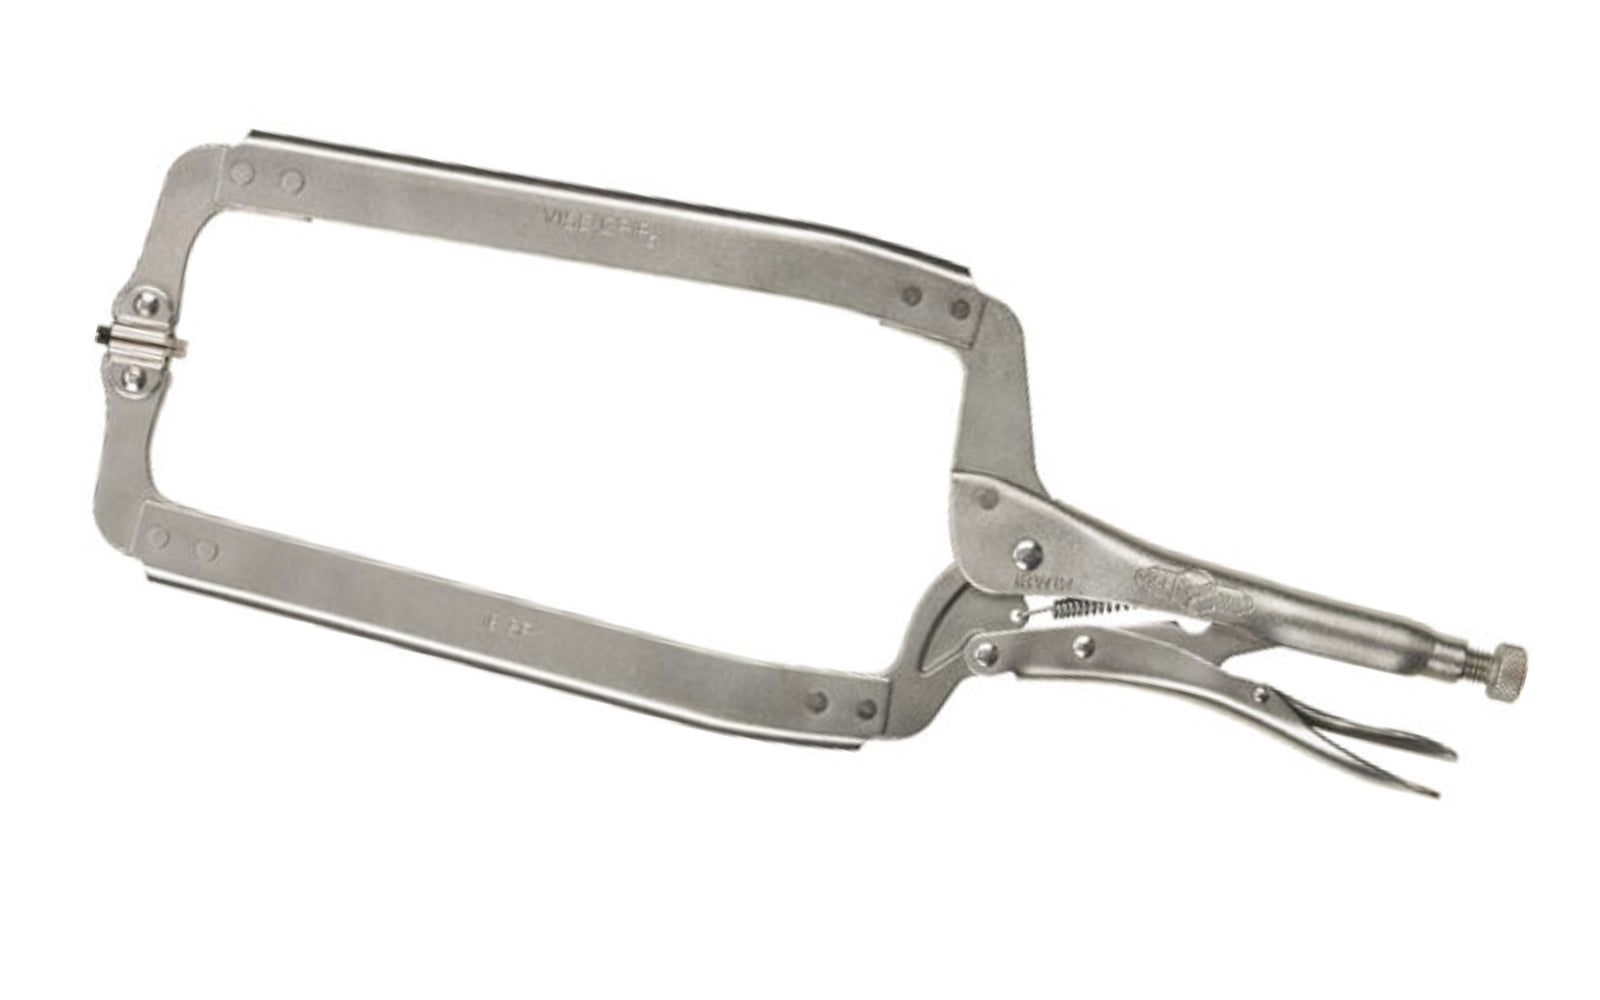 Irwin 18" "The Original" Vise Grip Locking C-Clamp Plier. Model 18SP. Item No. 22. Turn screw to adjust pressure and fit work. Stays adjusted for repetitive use. Constructed of high-grade heat-treated alloy steel for maximum toughness & durability. 8" Jaw Capacity.